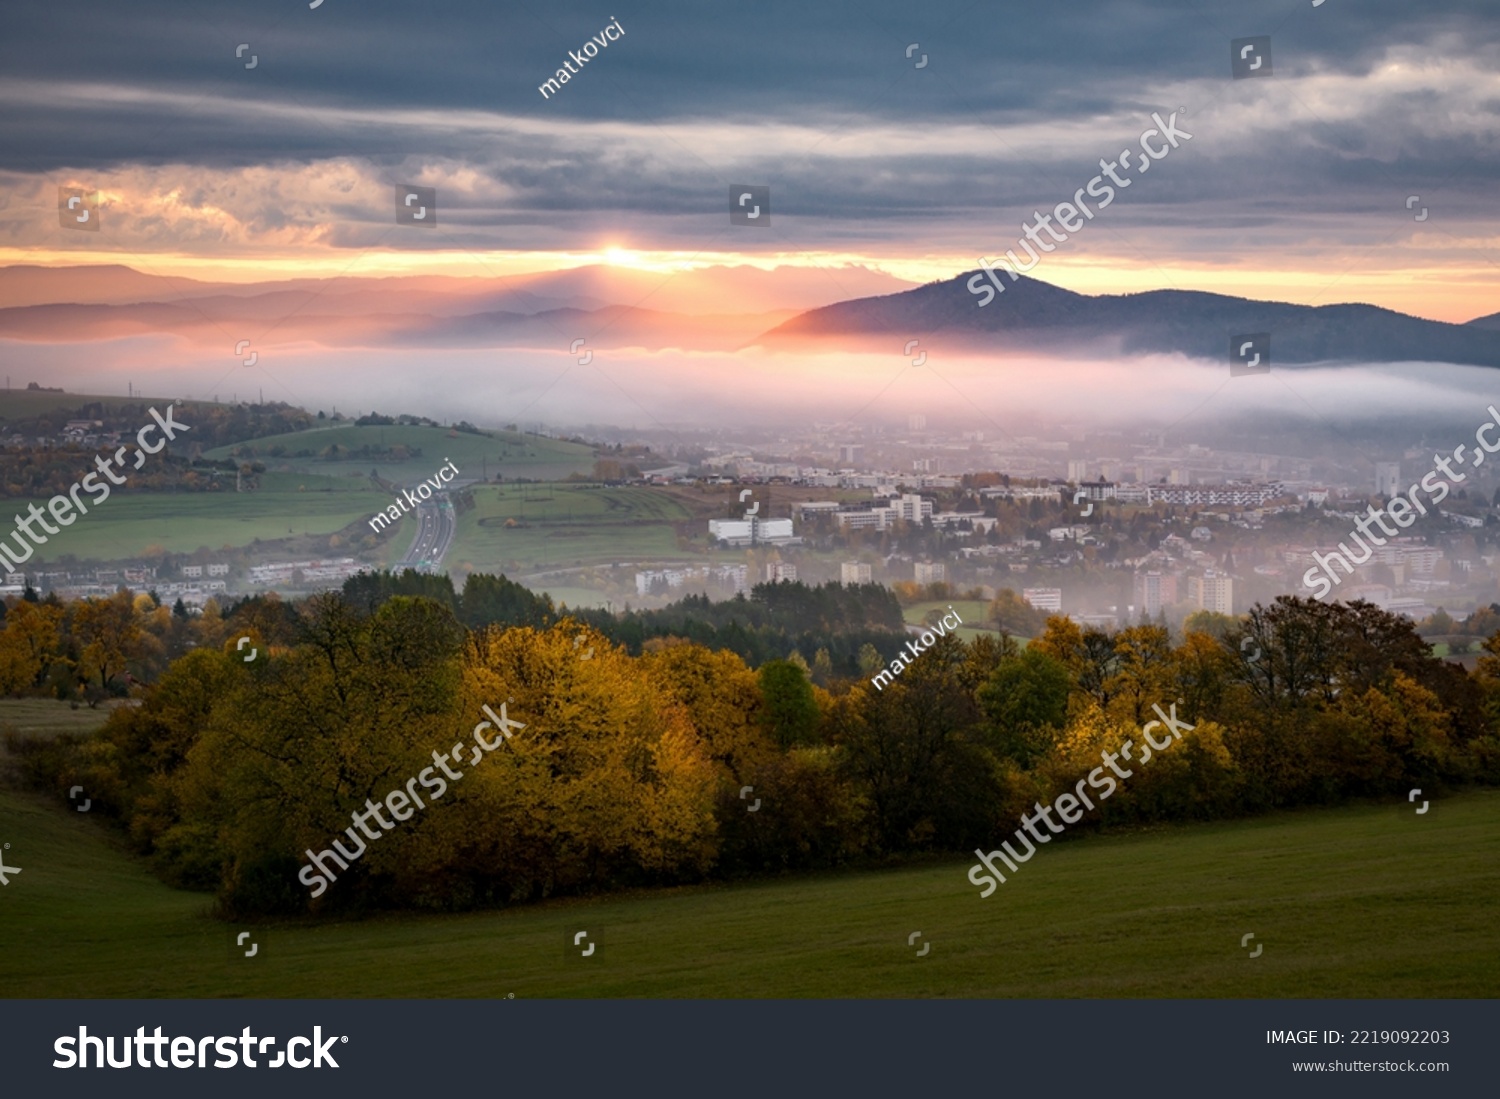 Foggy fall morning near Banska Bystrica. Landscape with forests and mountains around the city. Autumn colored trees at sunrise. #2219092203